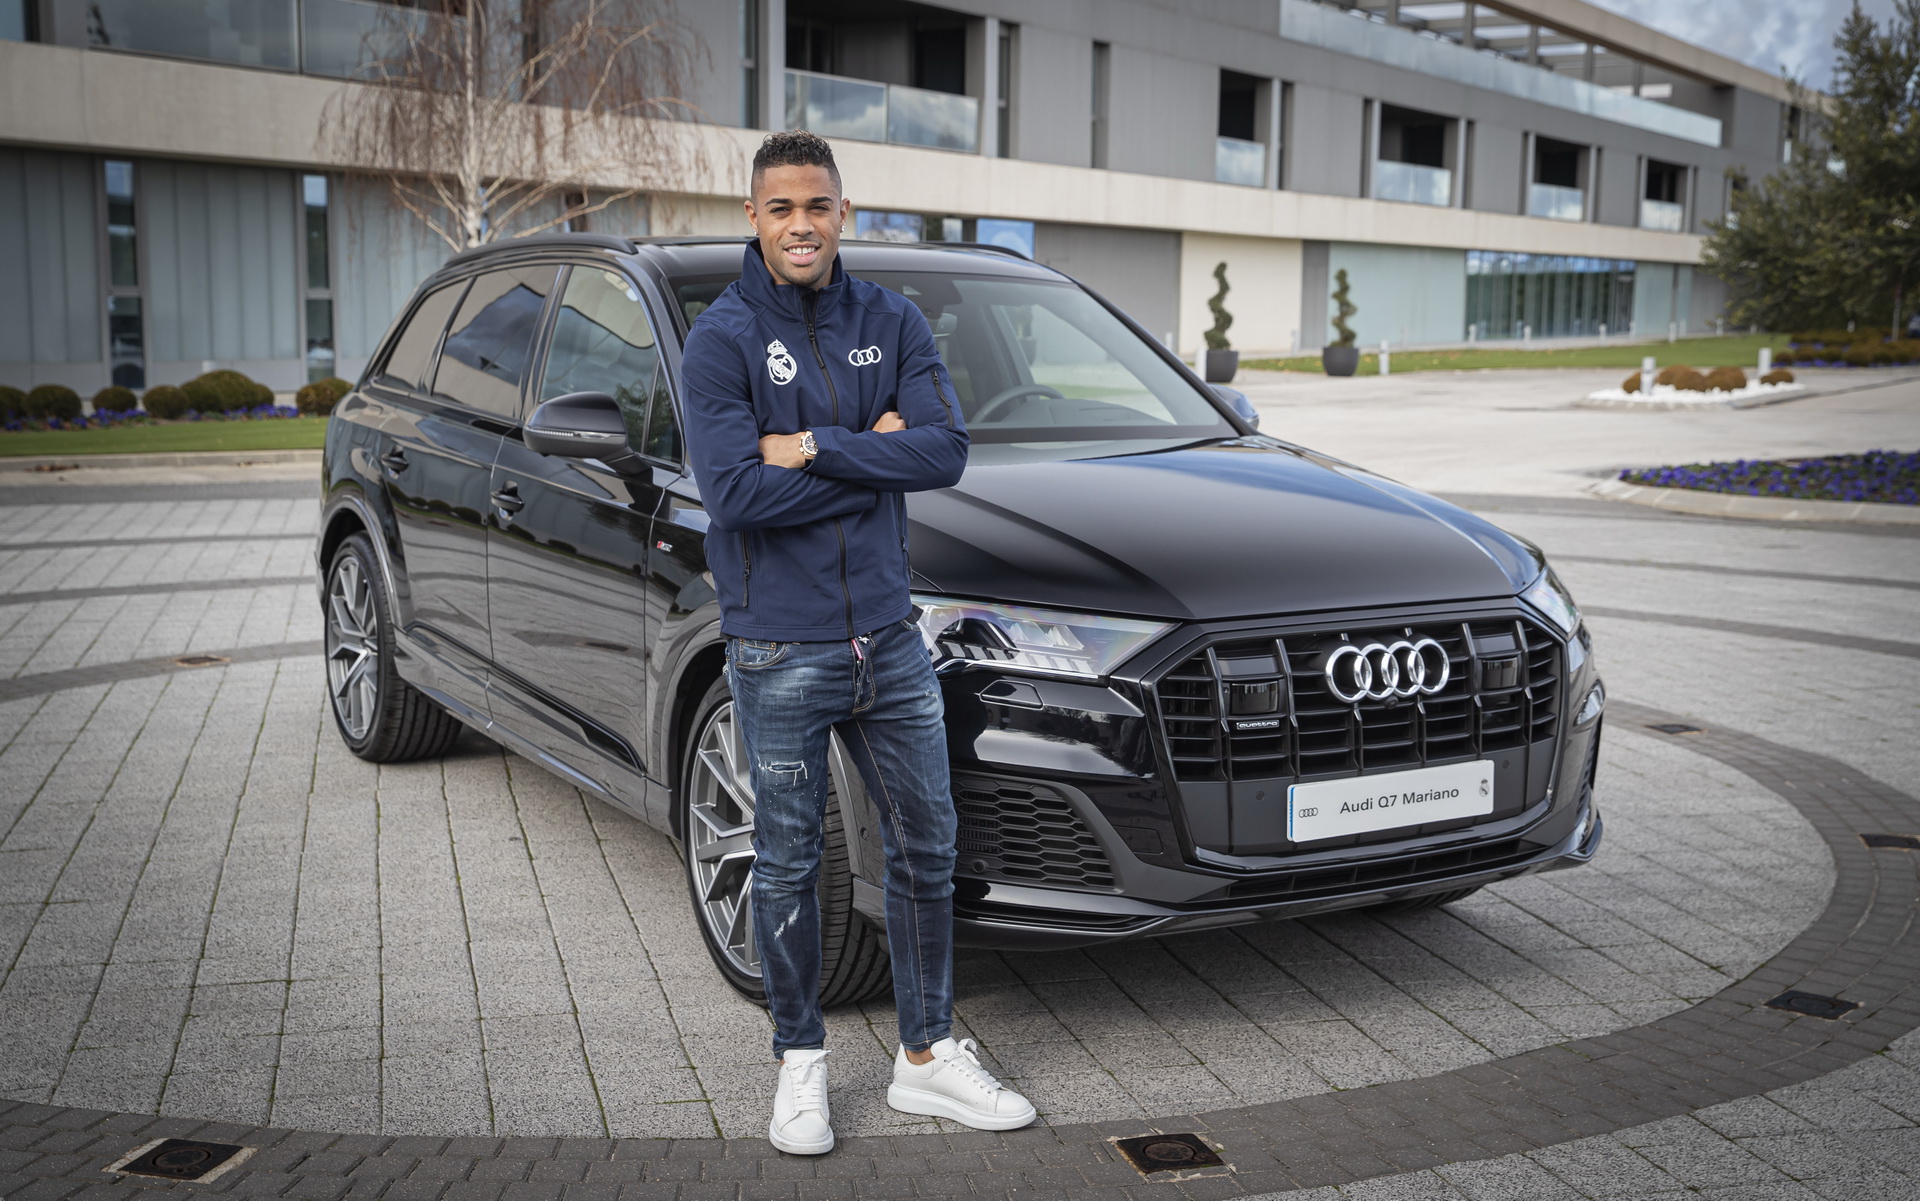 Real Madrid Players Take Delivery Of Their Free Audi Cars | Carscoops